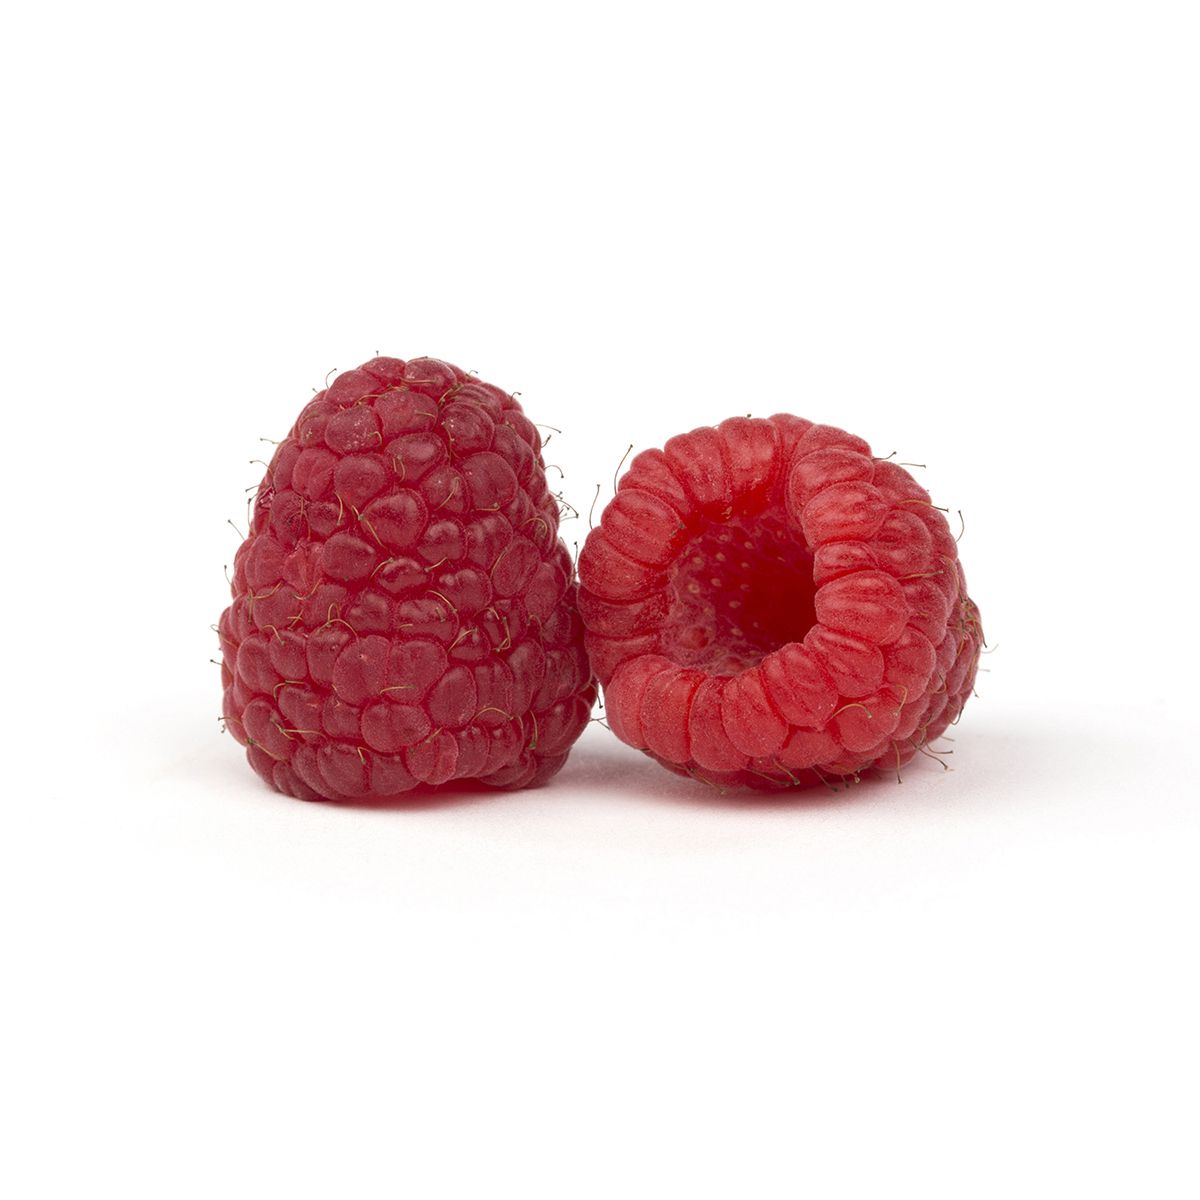 Driscoll'S Limited Edition Sweetest Batch Raspberries 6 OZ